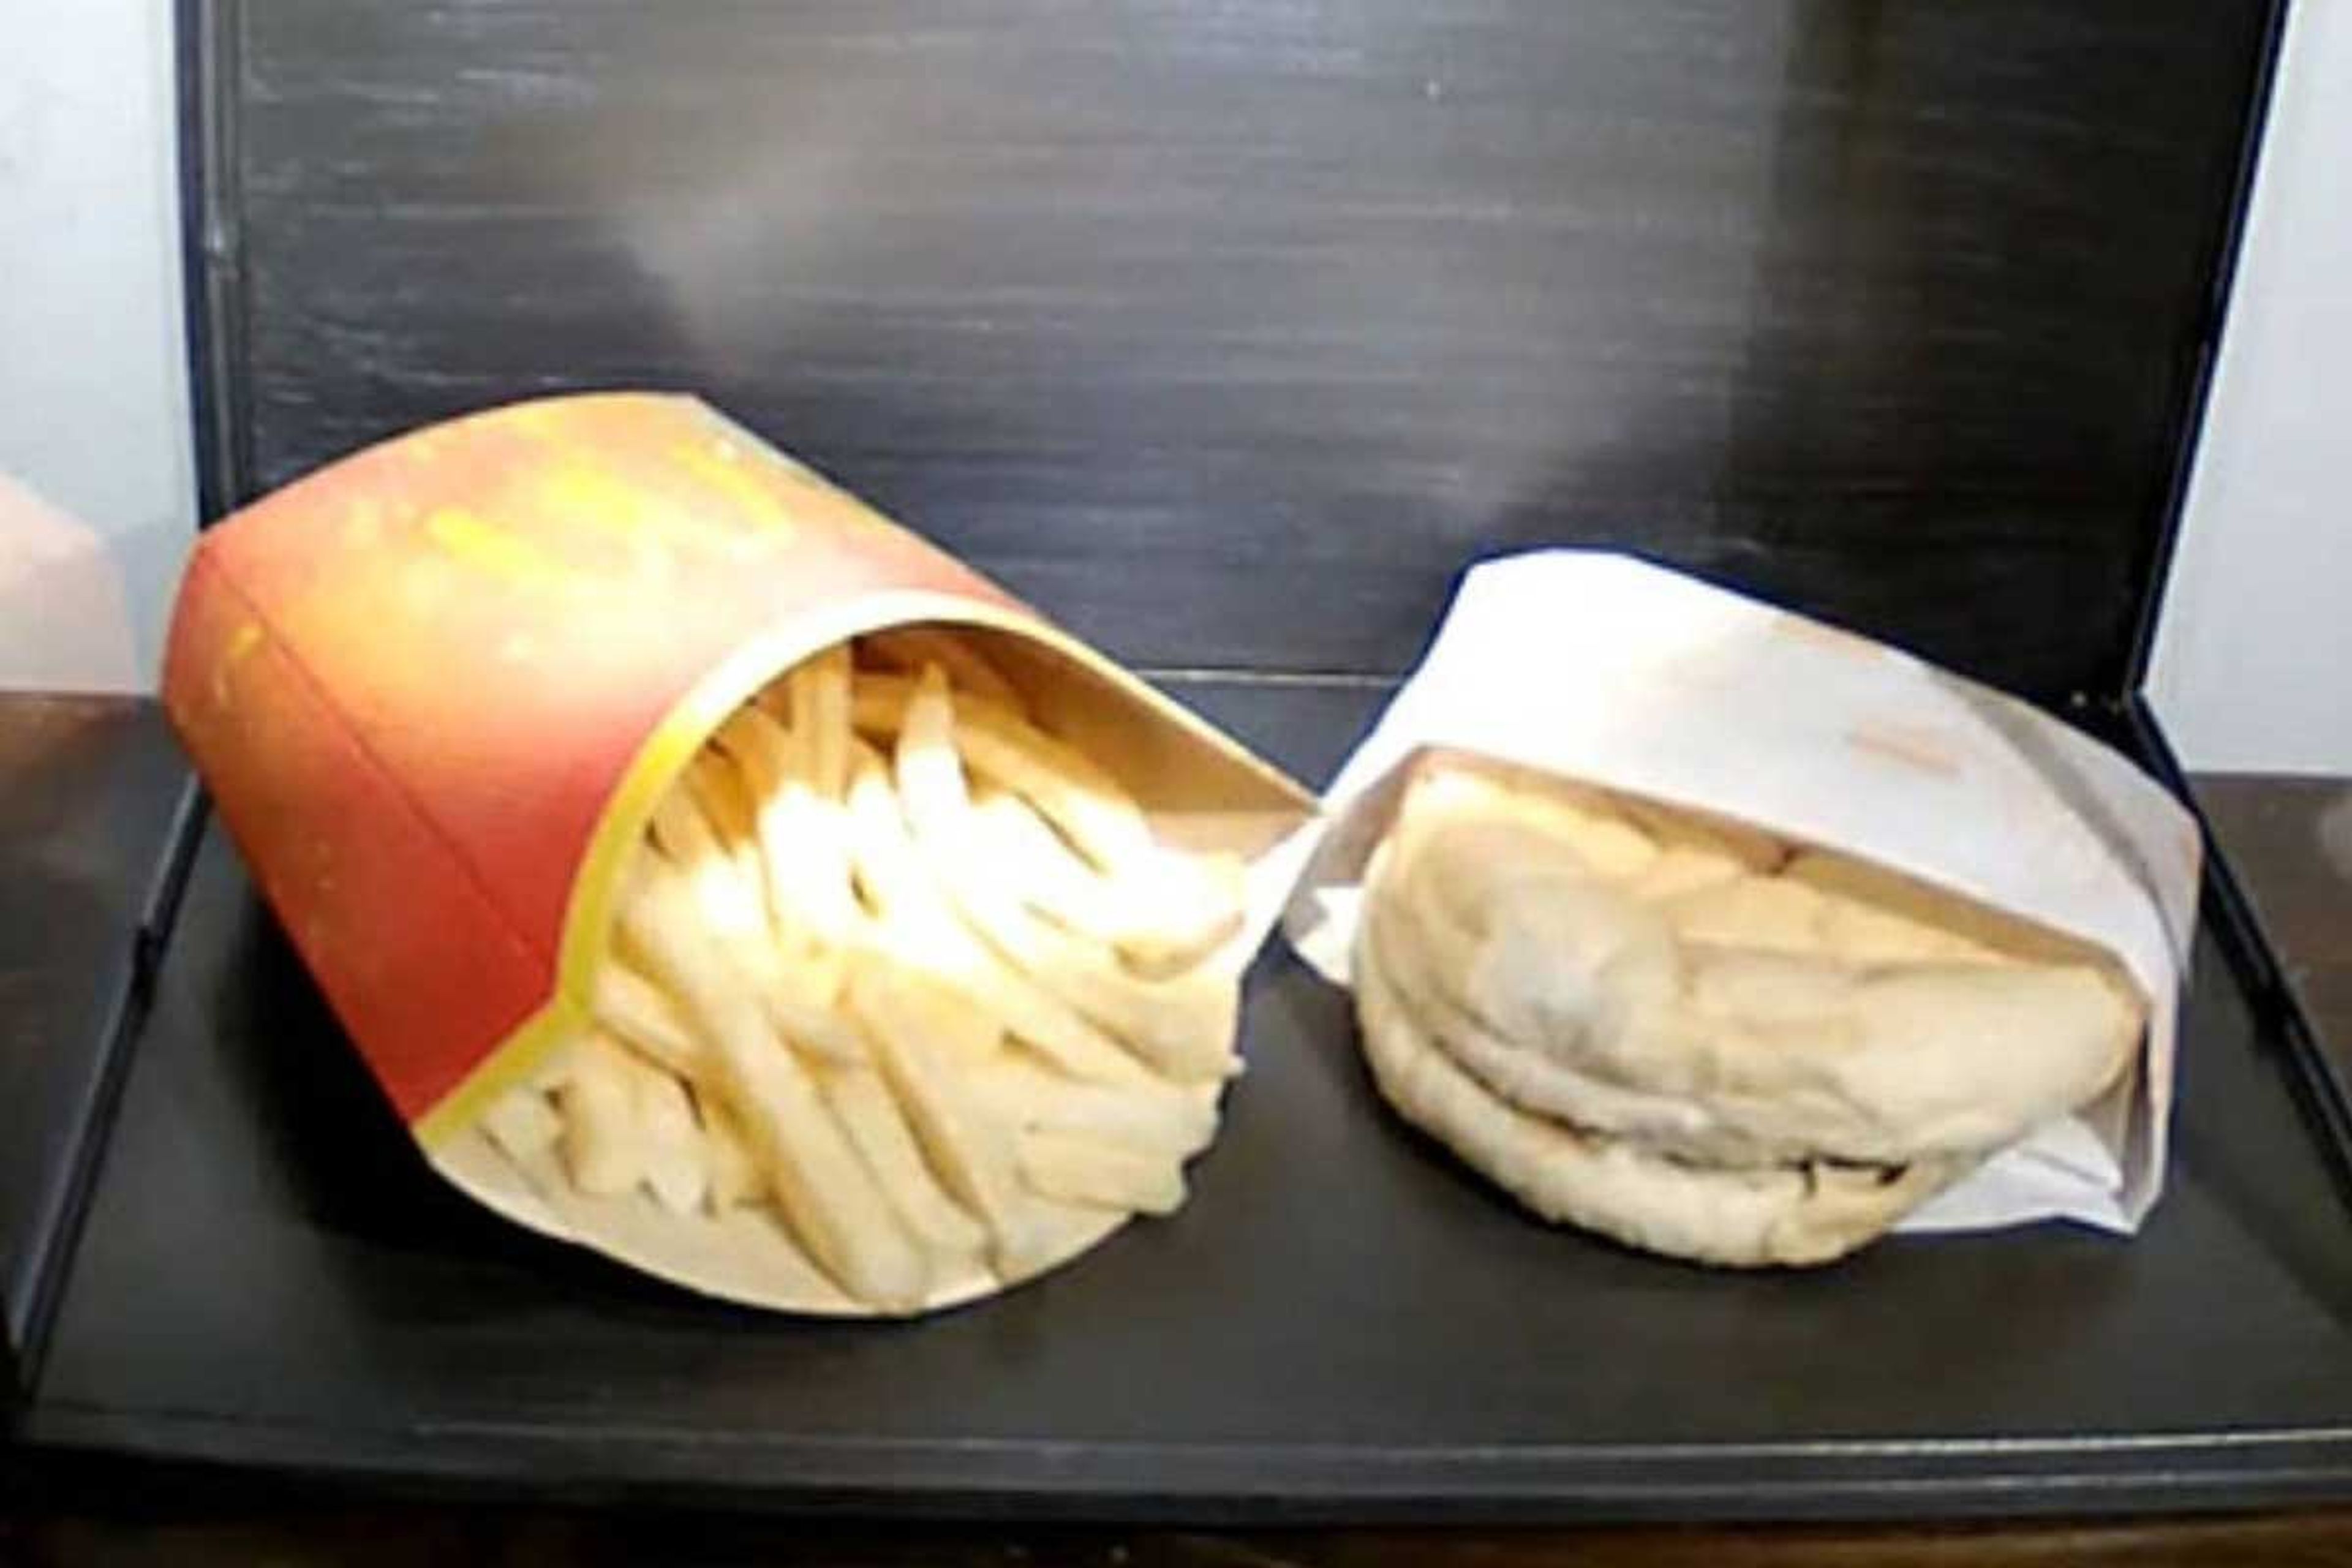 The last mcdonald burger and fries in Iceland